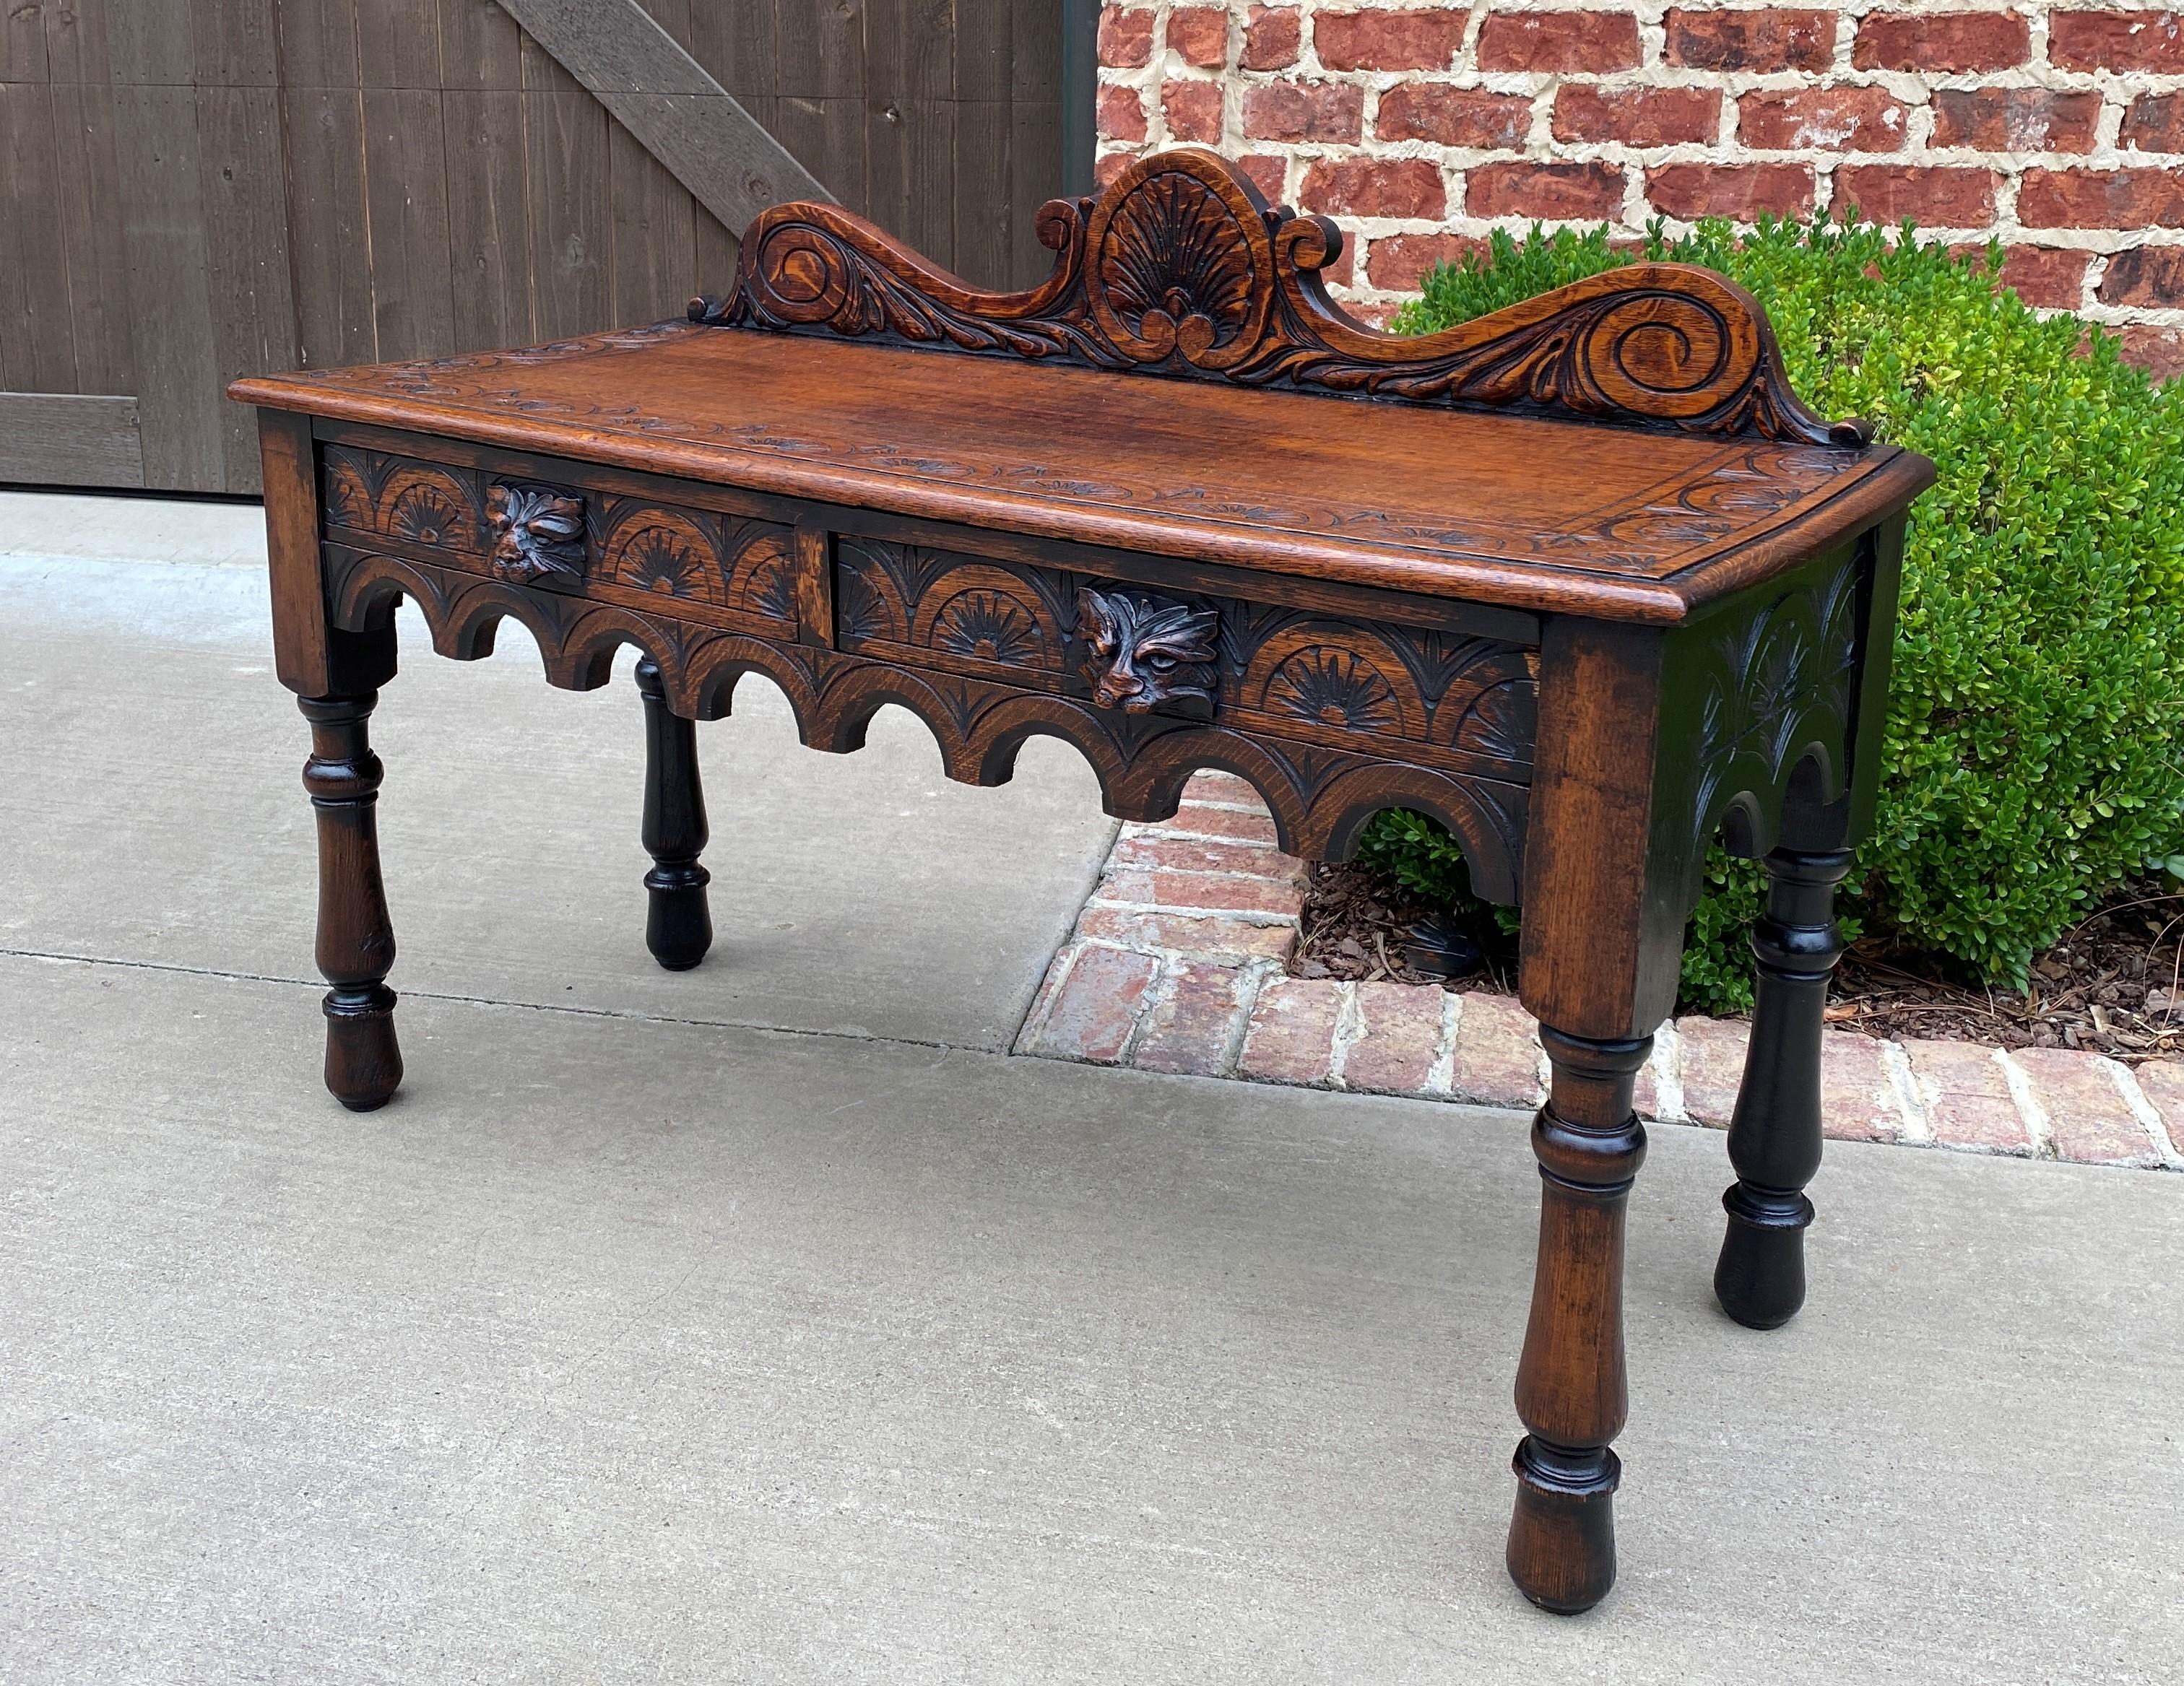 Antique English Window Seat Bed Bench Gothic Revival Carved Oak 2 Drawers c.1900 In Good Condition For Sale In Tyler, TX